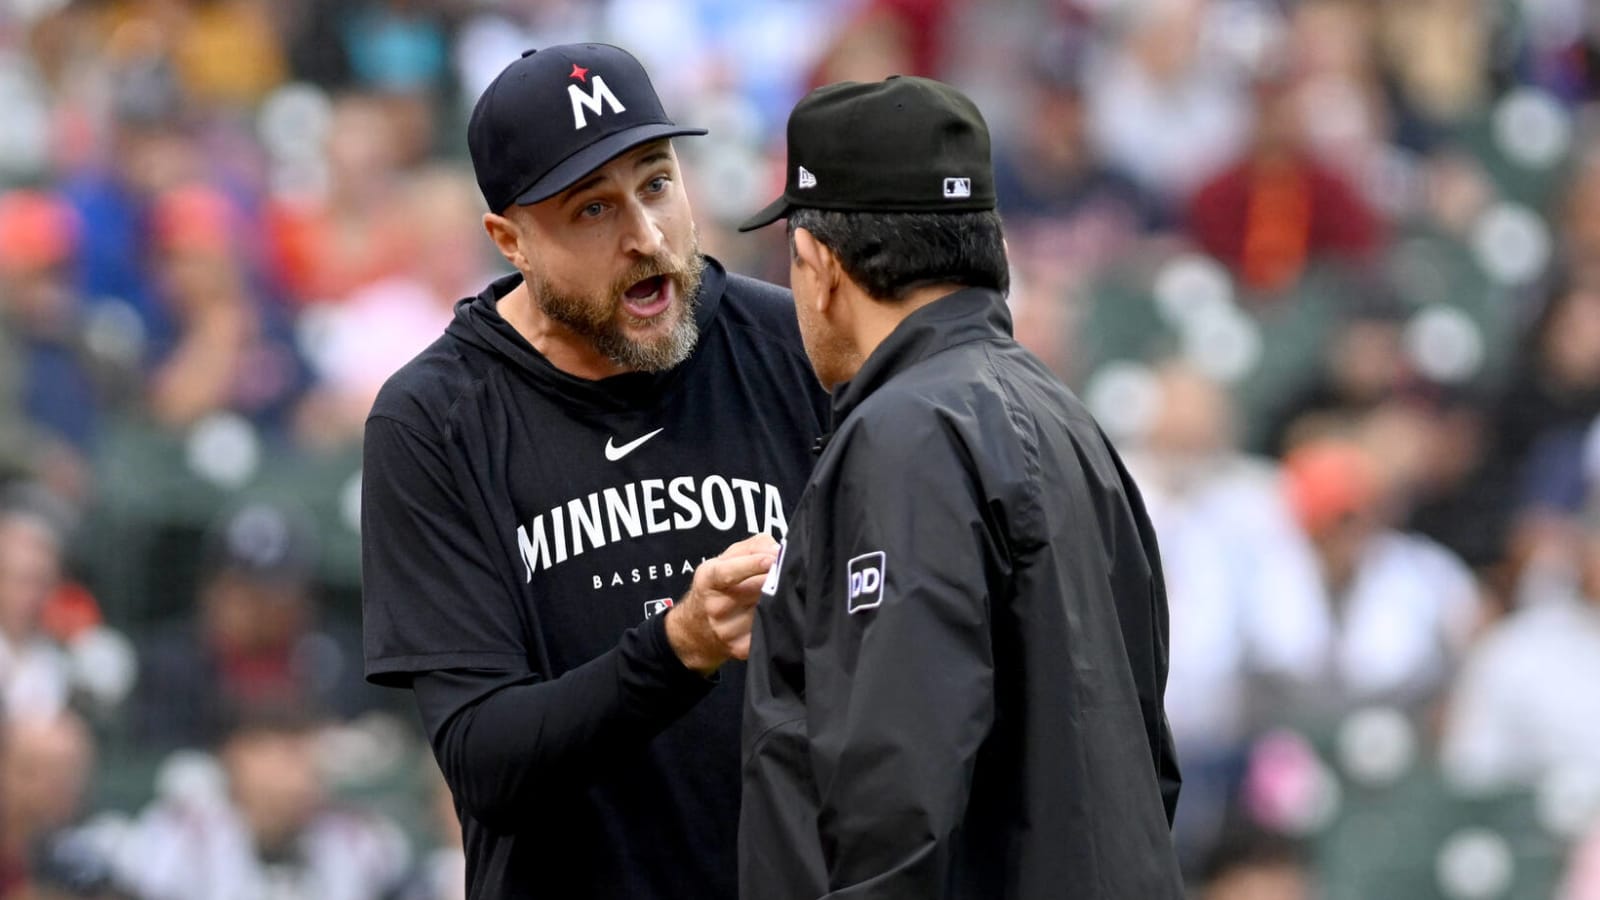 Watch: What umpire Lance Barrett told Rocco Baldelli before ejection